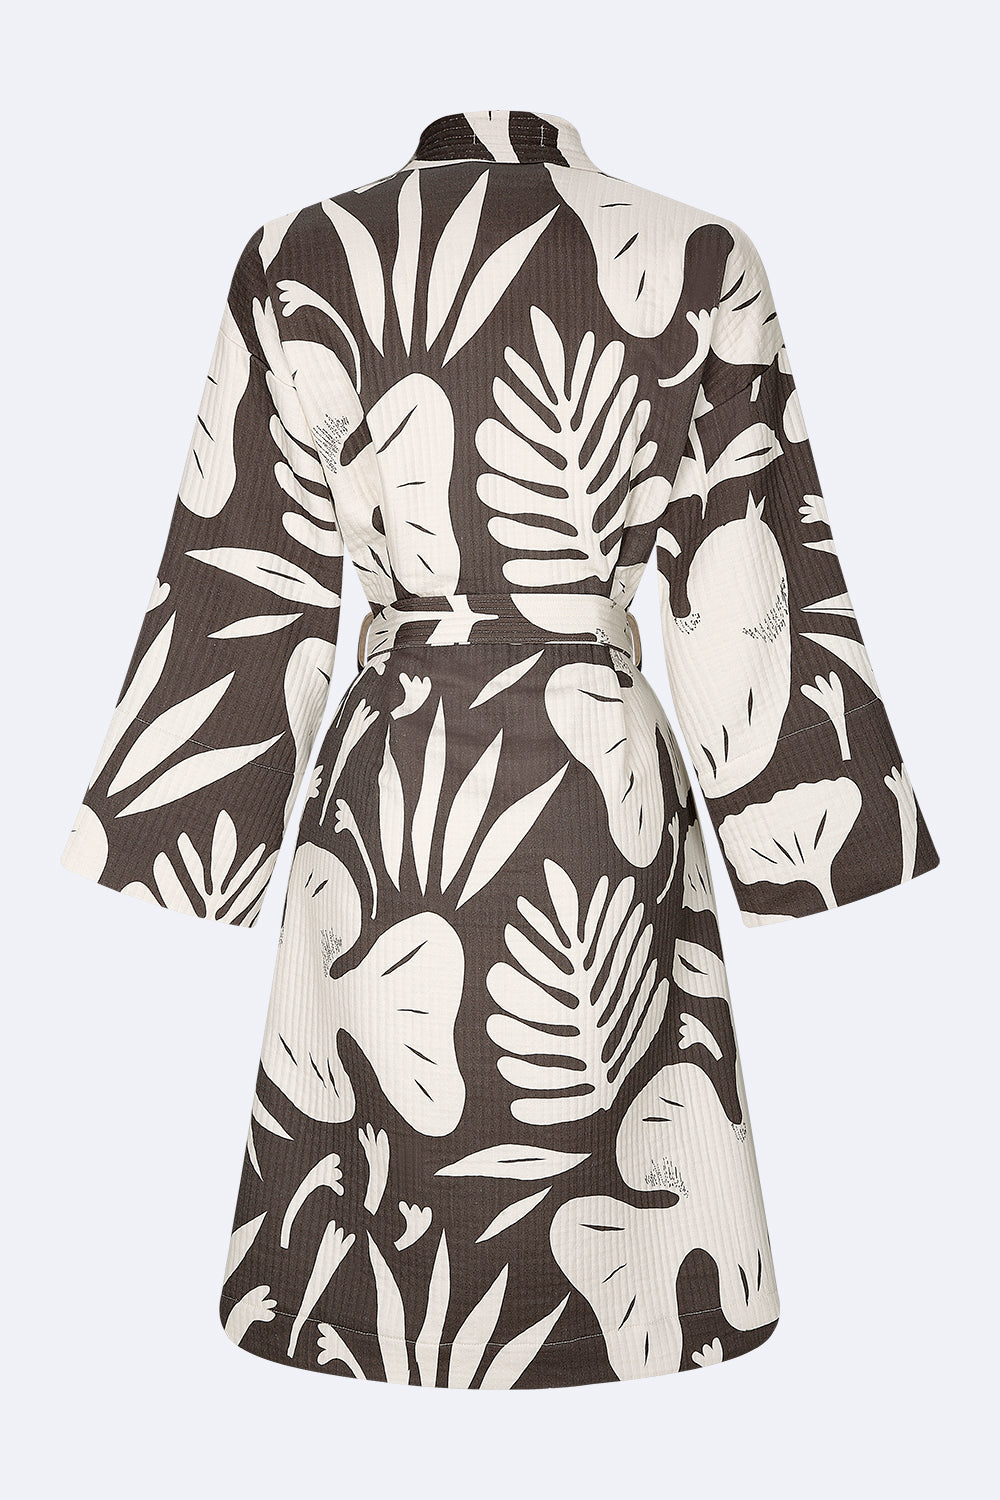 Black and white kimono - 100% cotton with contemporary pattern in faded black and offwhite tones, can be used as a bath or home robe or as a jacket